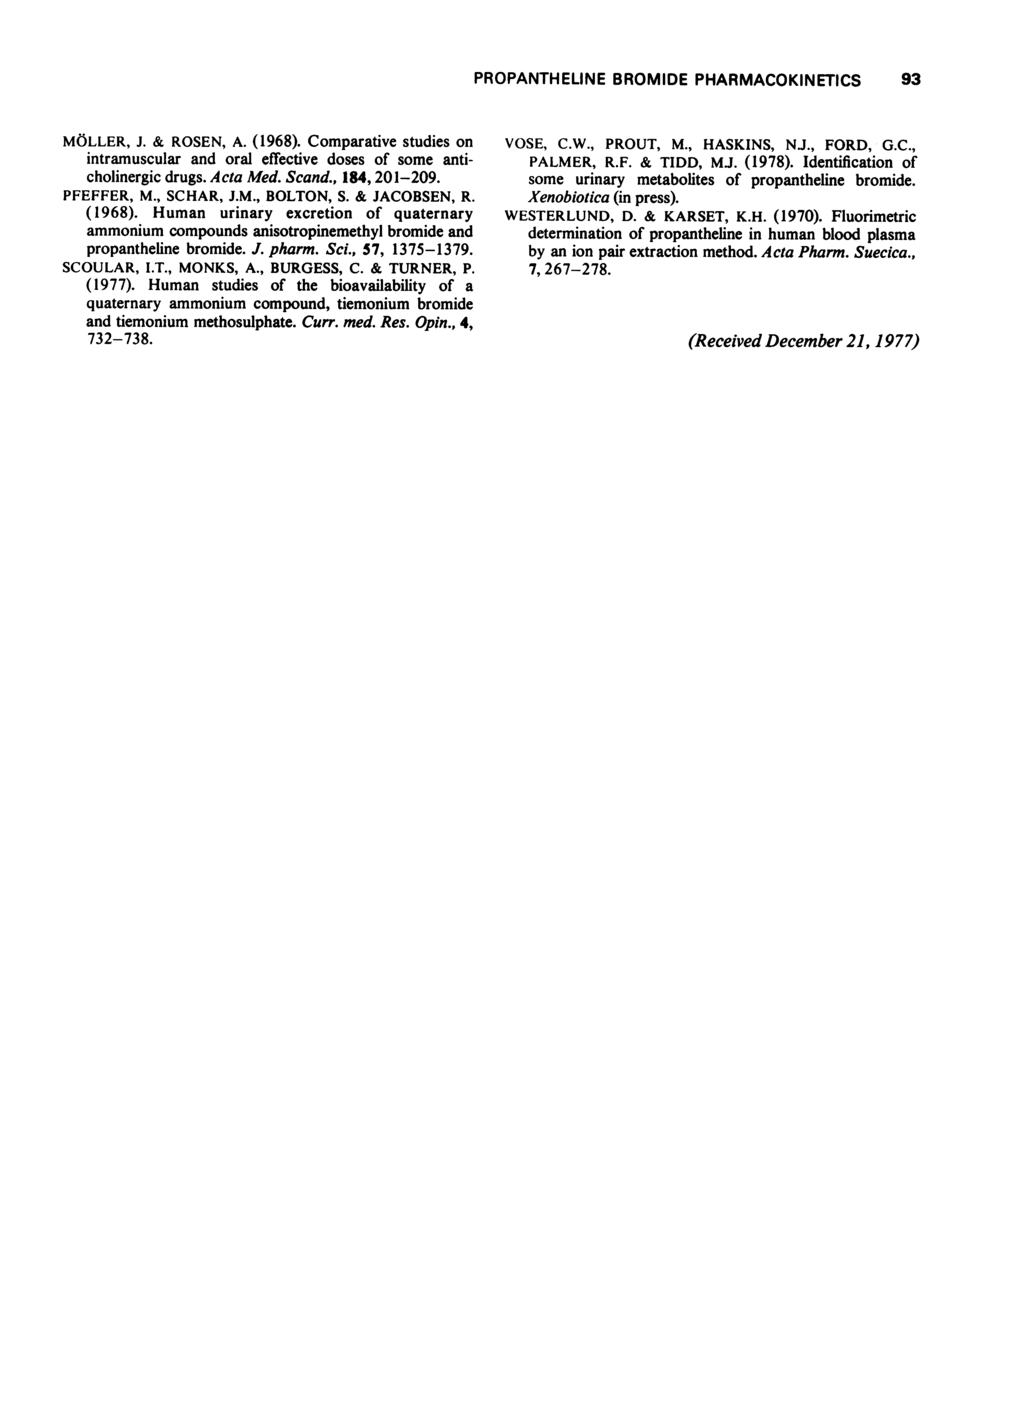 PROPANTHELINE BROMIDE PHARMACOKINETICS 93 MOLLER, J. & ROSEN, A. (1968). Comparative studies on intramuscular and oral effective doses of some anticholinergic drugs. Acta Med. Scand., 184, 21-29.